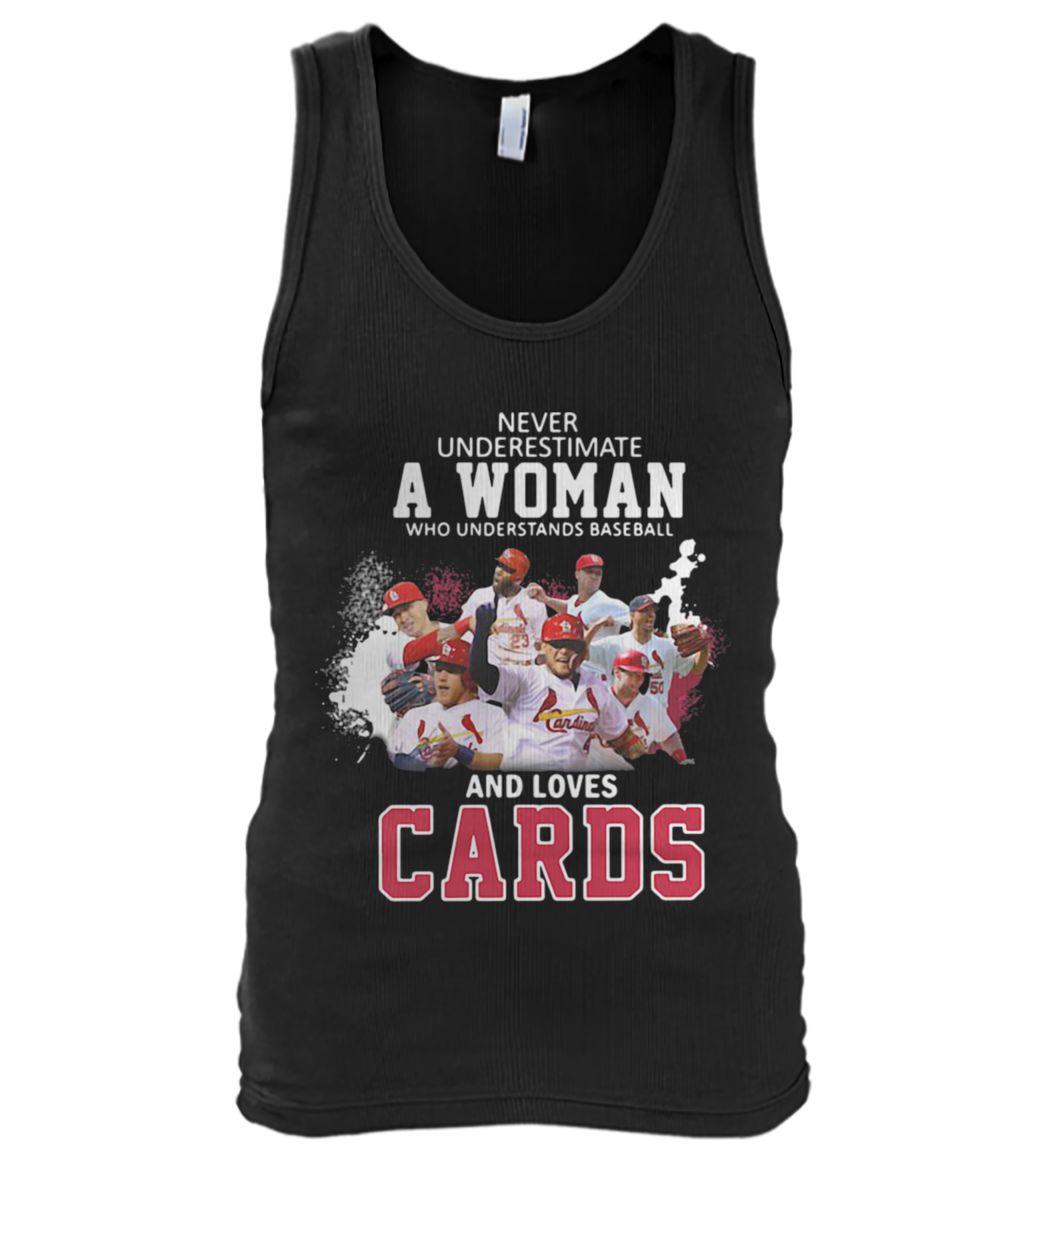 Never underestimate a woman who understands baseball and loves st louis cardinals tank top